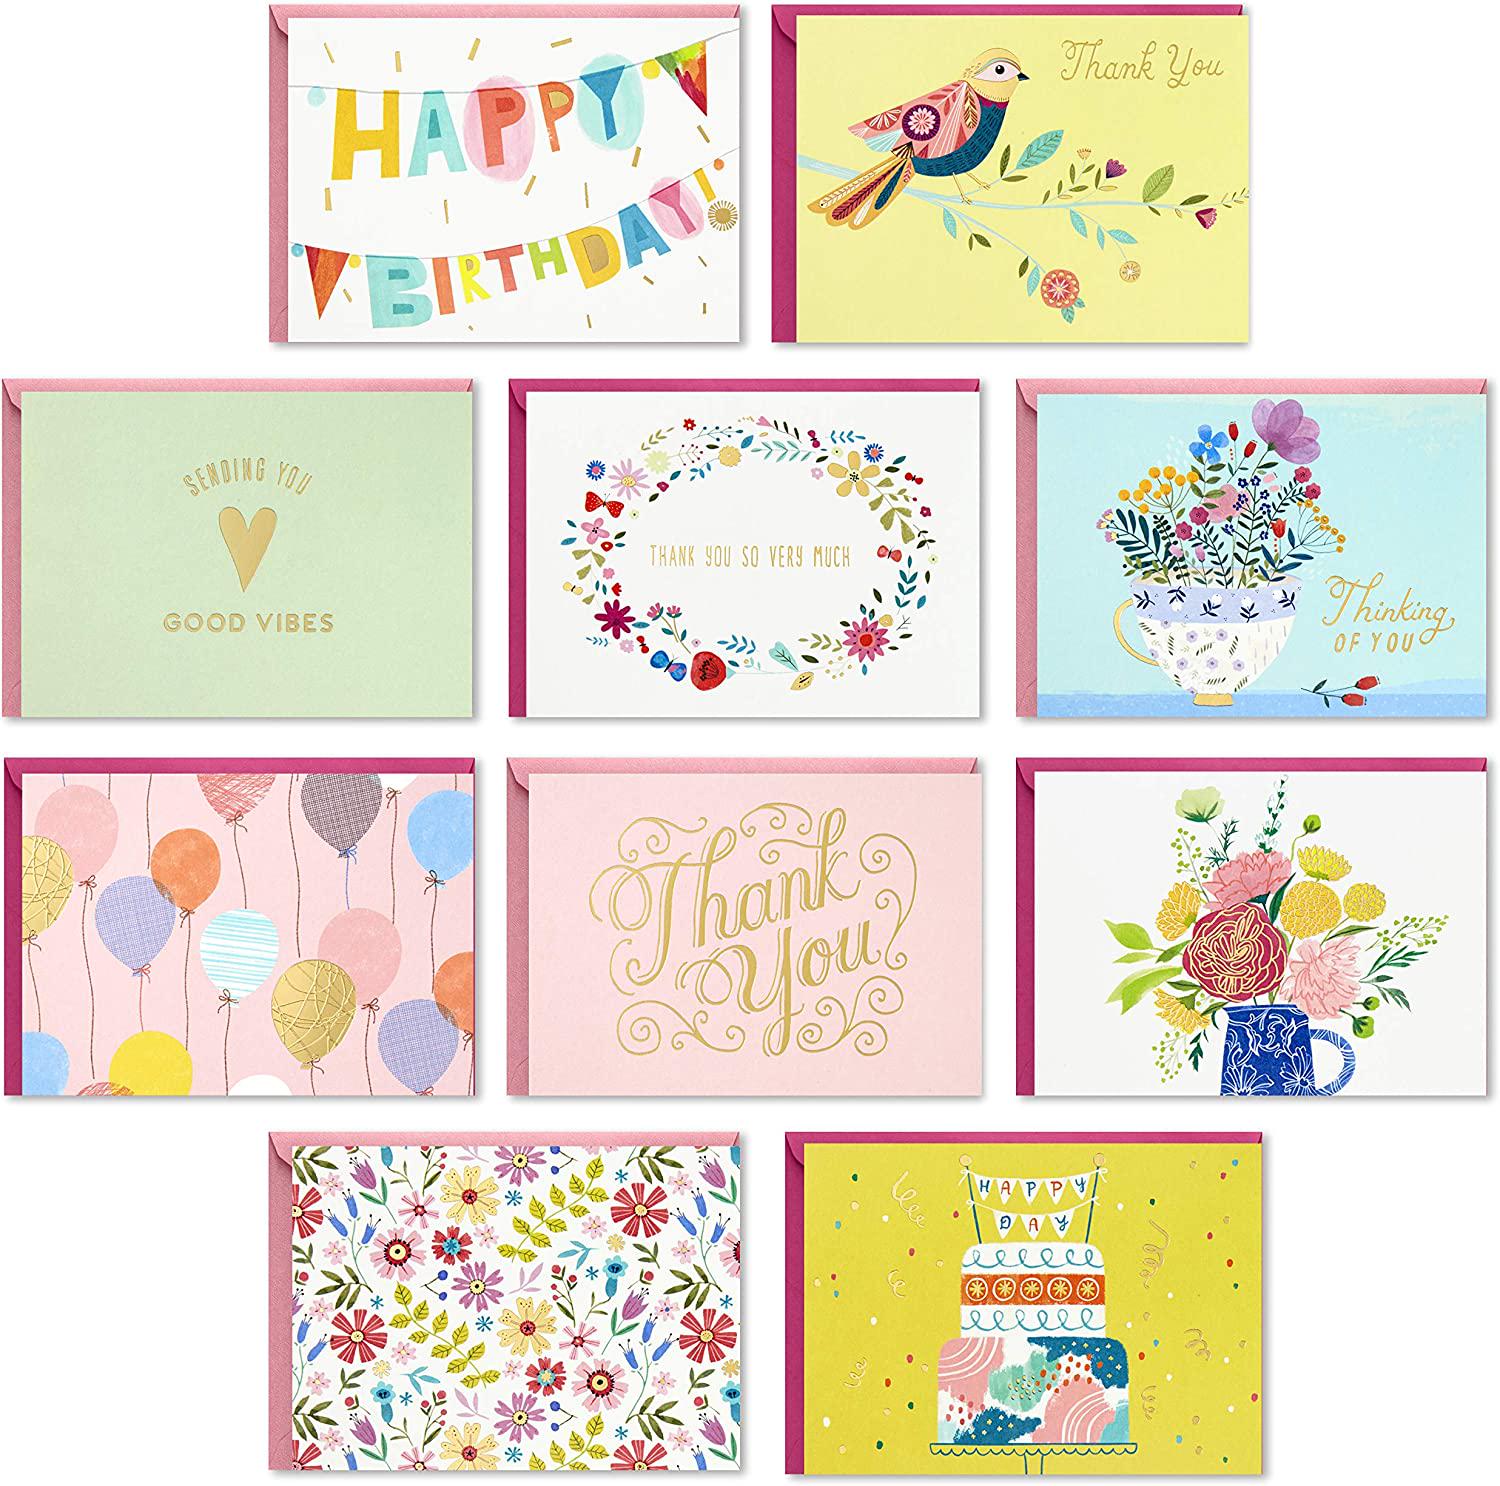 Hallmark, Hallmark Pack of 30 Assorted Boxed Greeting Cards, Good Vibes Birthday Cards, Thinking of You Cards, Thank You Cards, Blank Cards